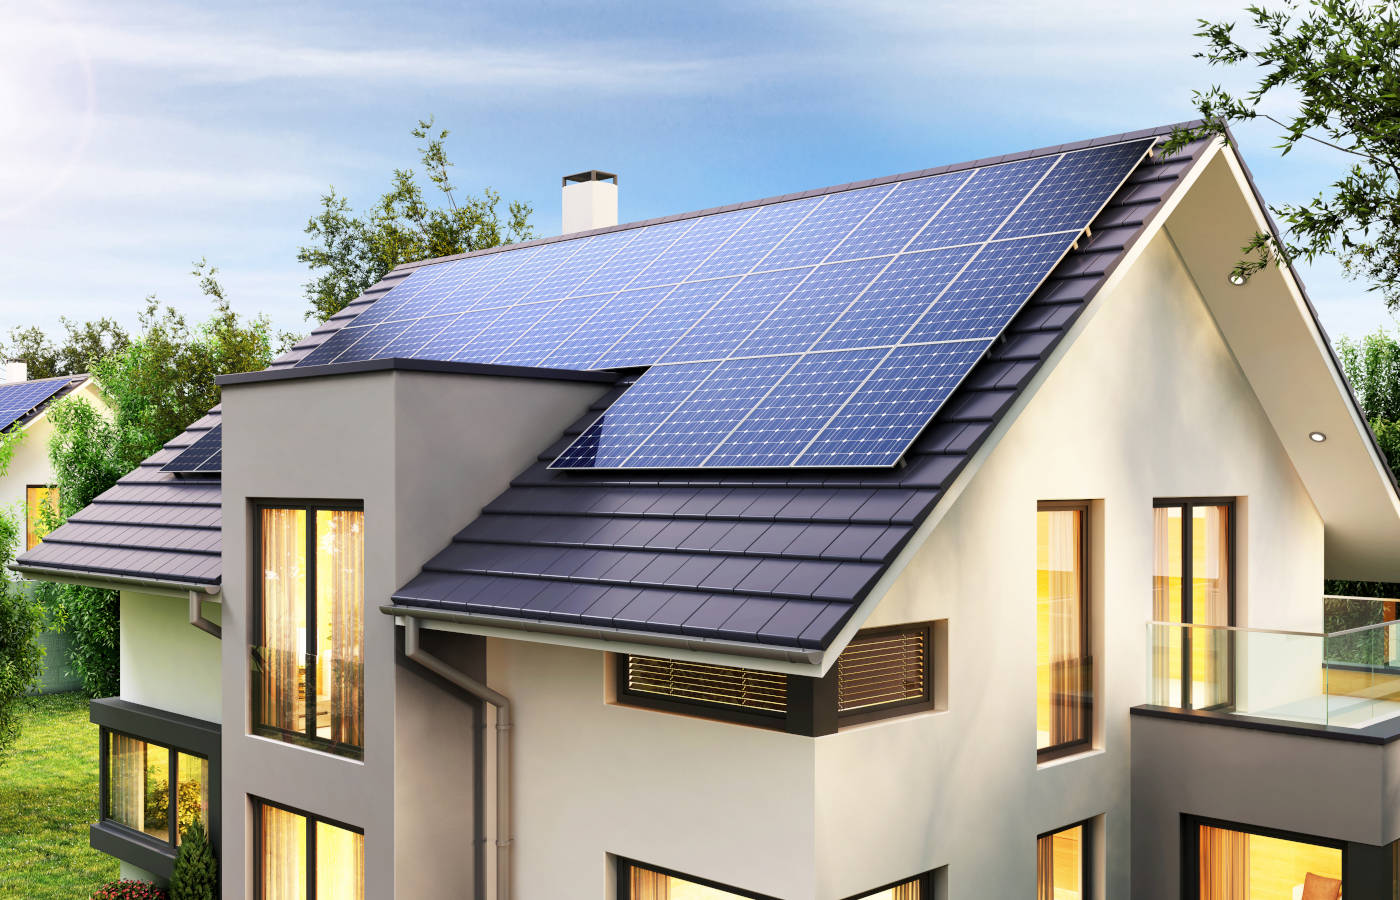 A house with solar energy systems reduces energy consumption